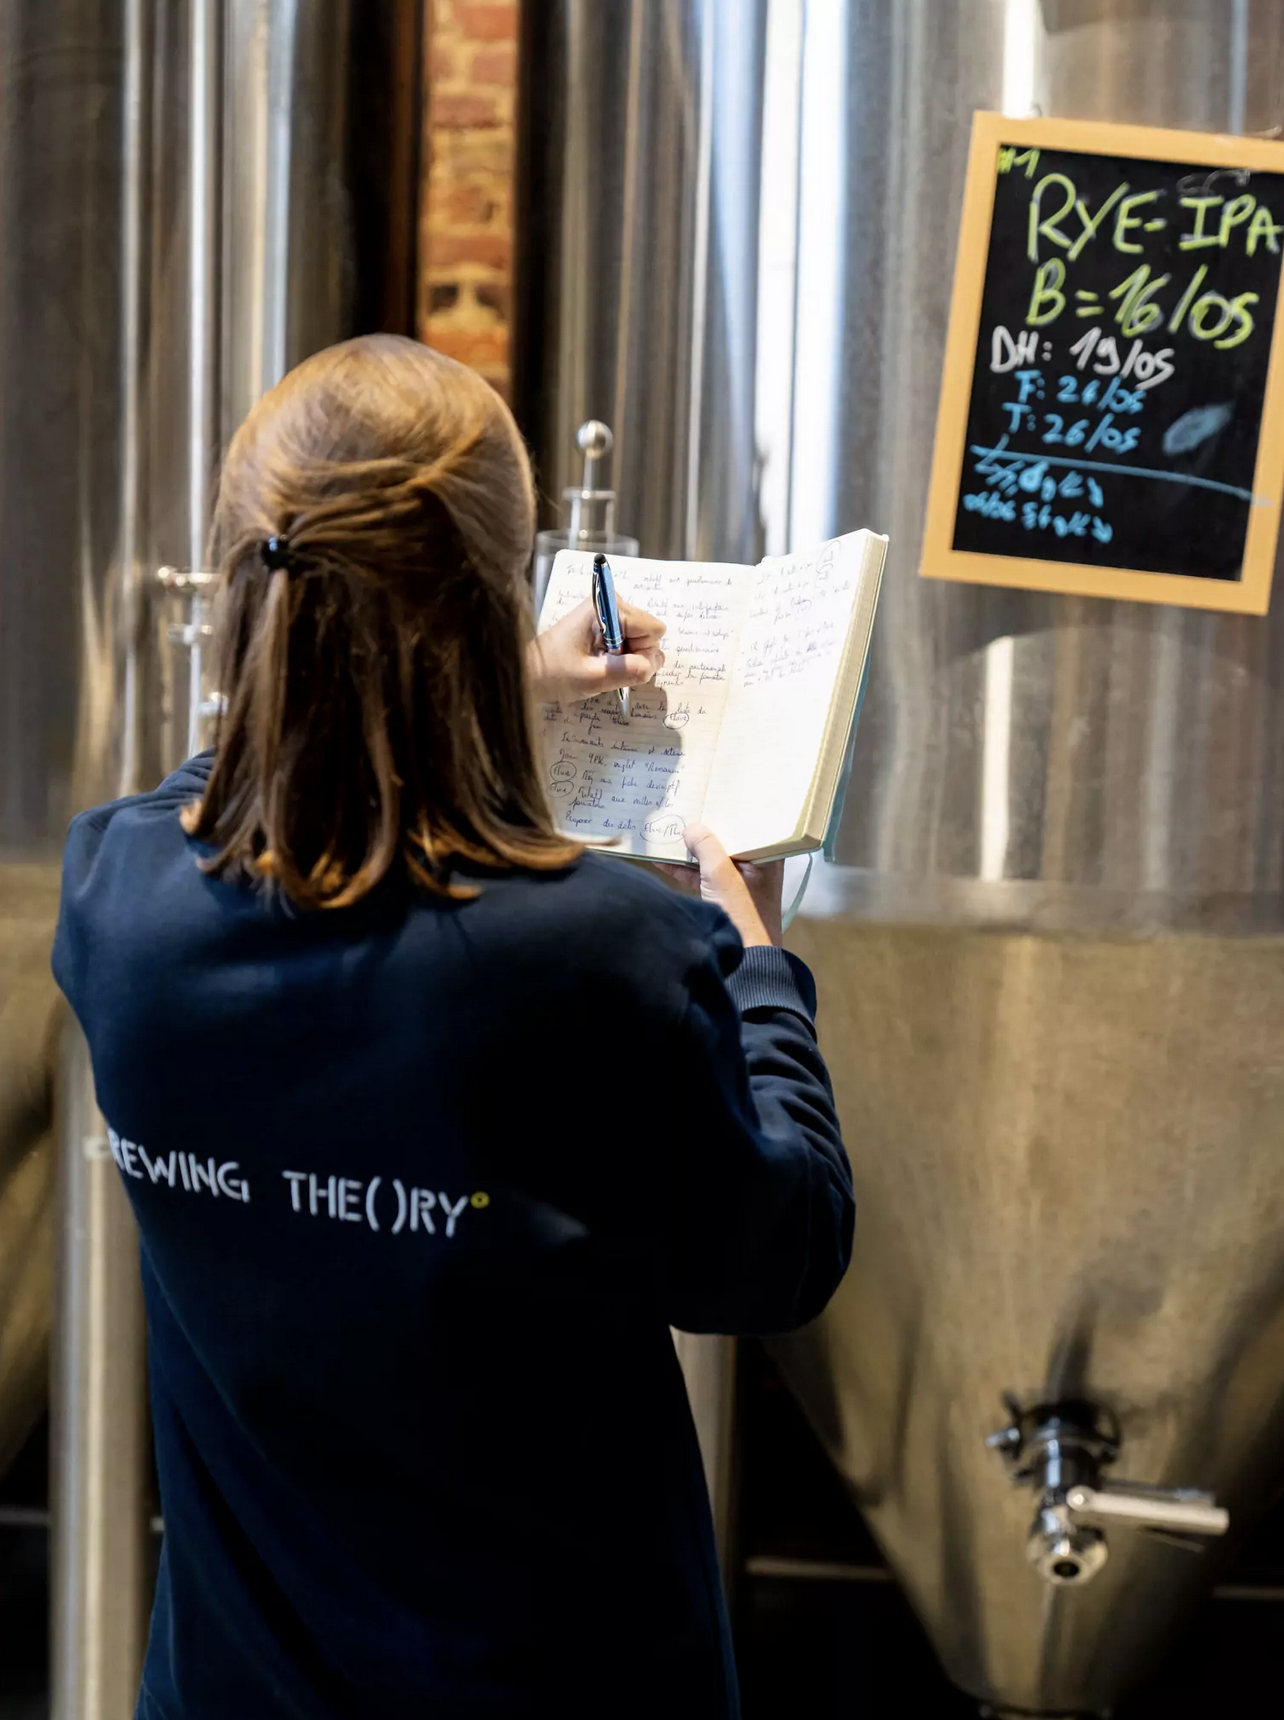 BREWING THEORY